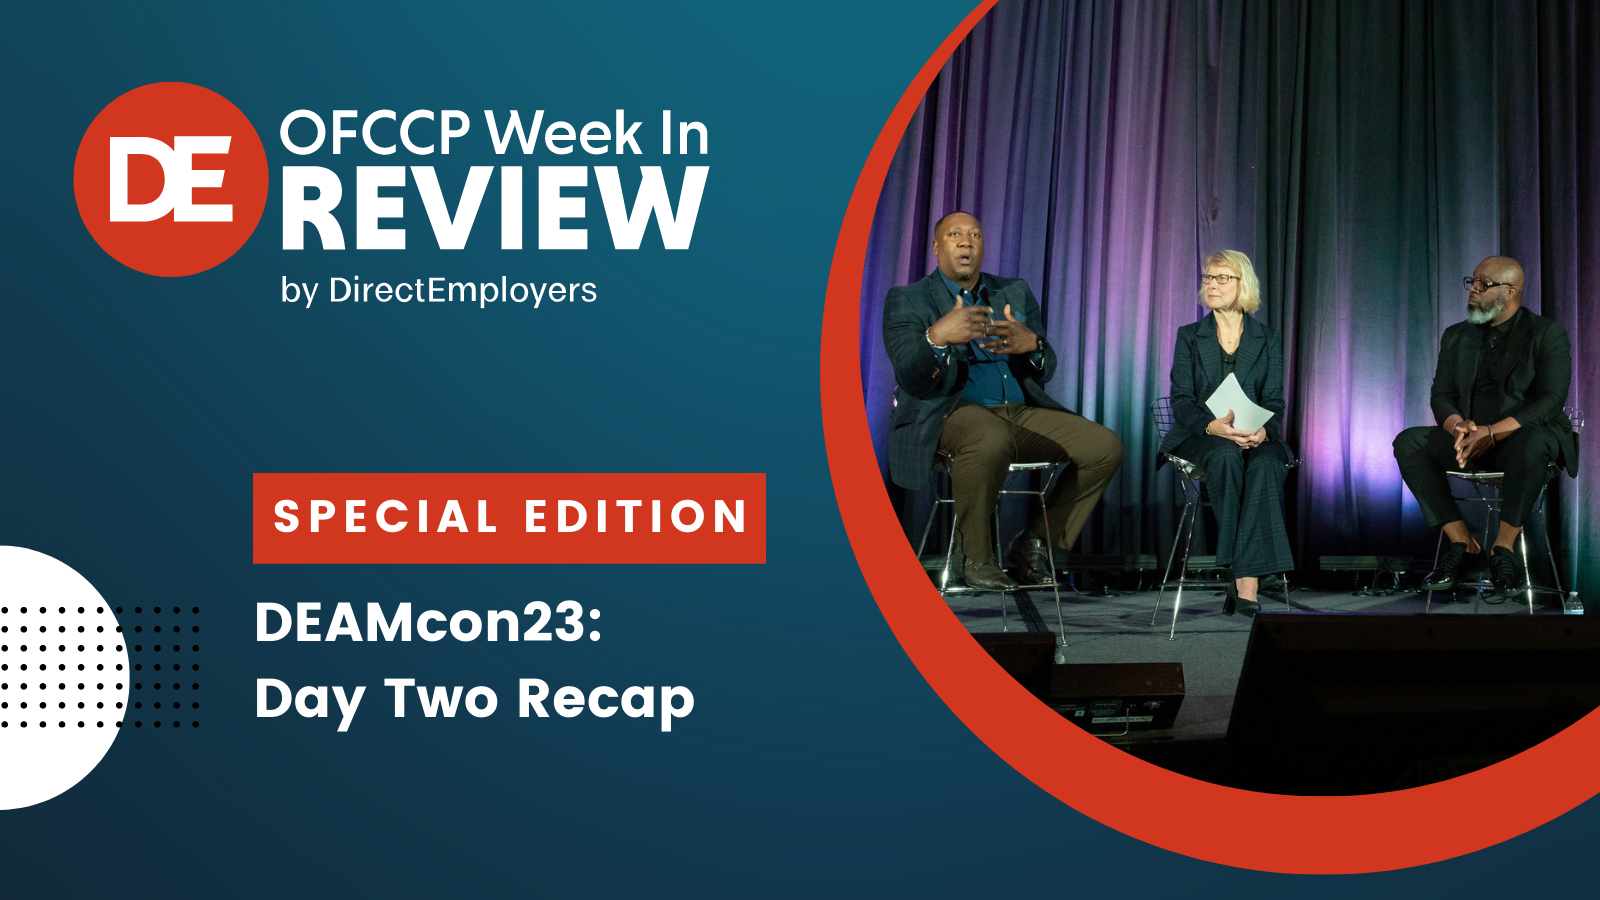 OFCCP Week in Review logo with text, 